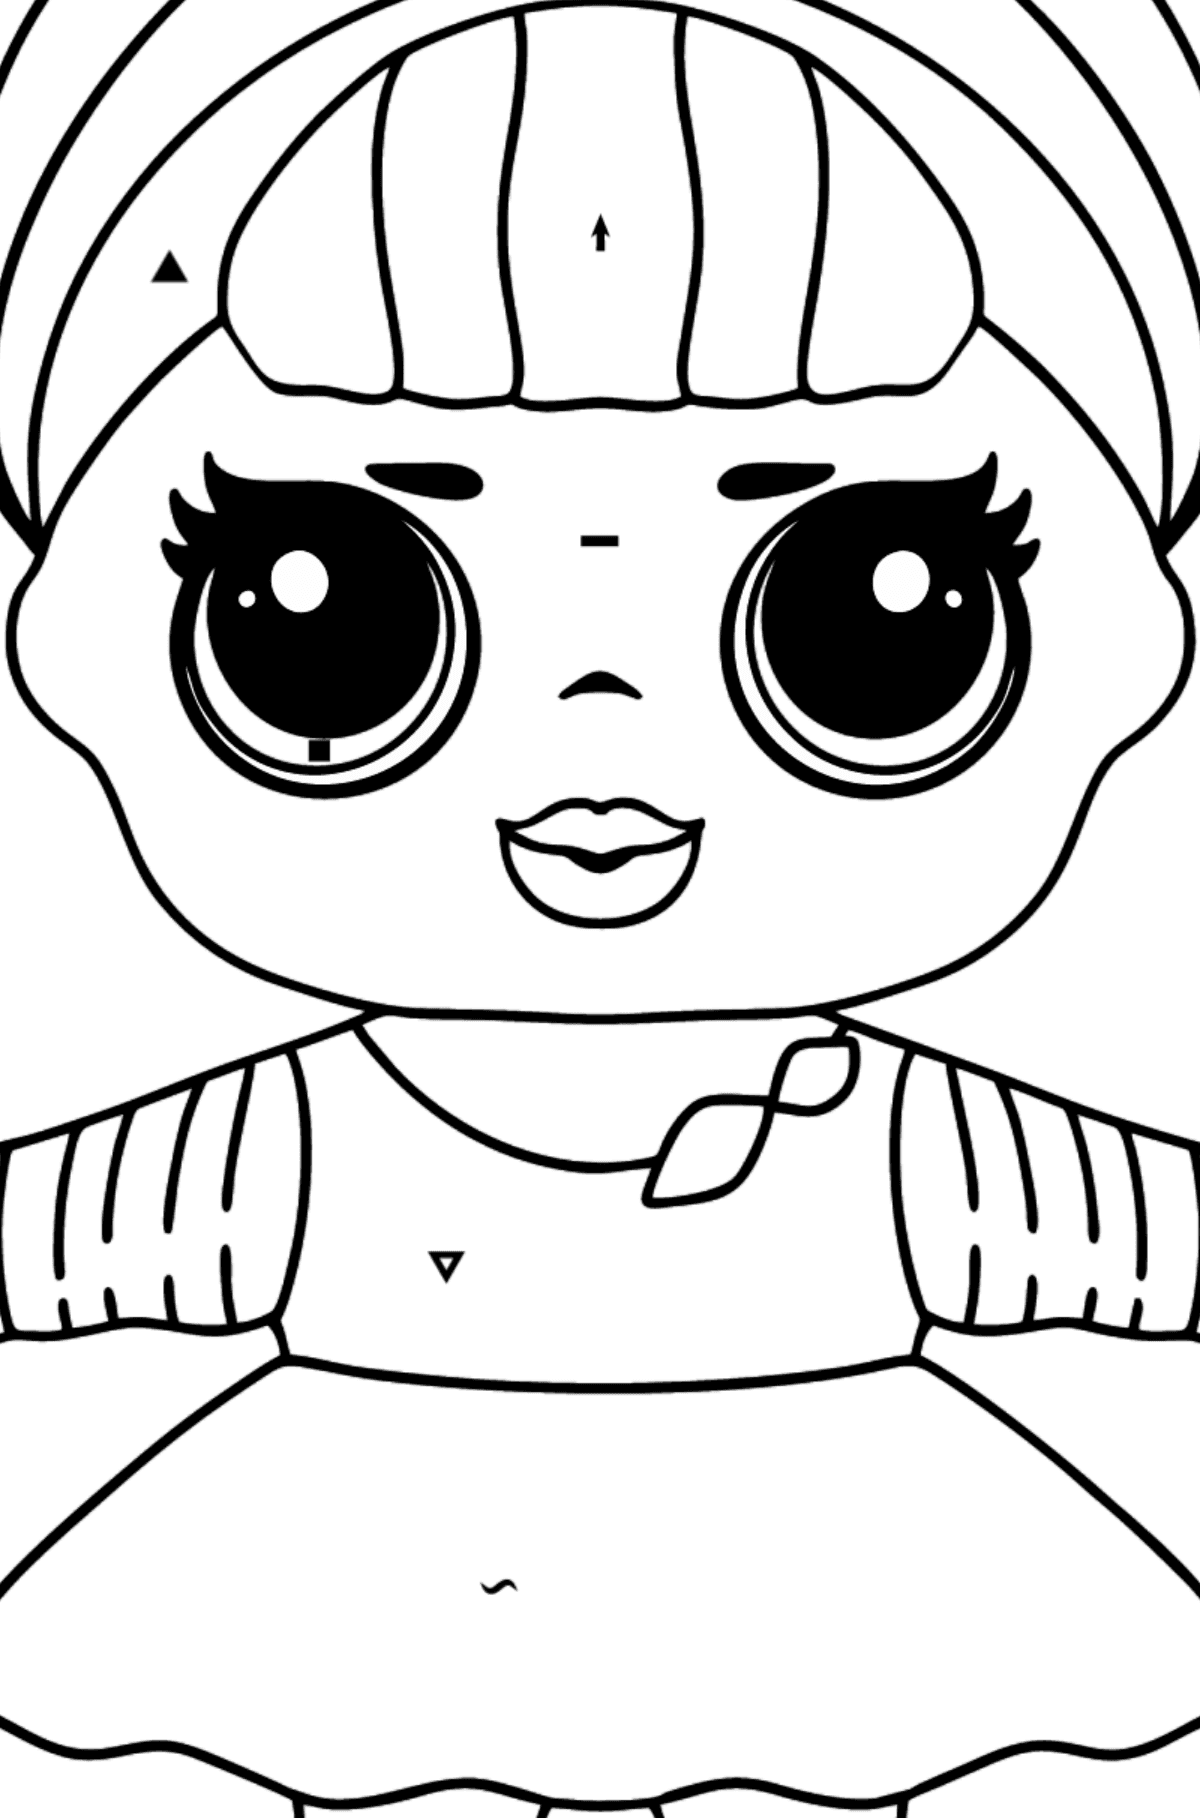 LOL Surprise Doll Sis Swing Coloring page - Coloring by Symbols for Kids